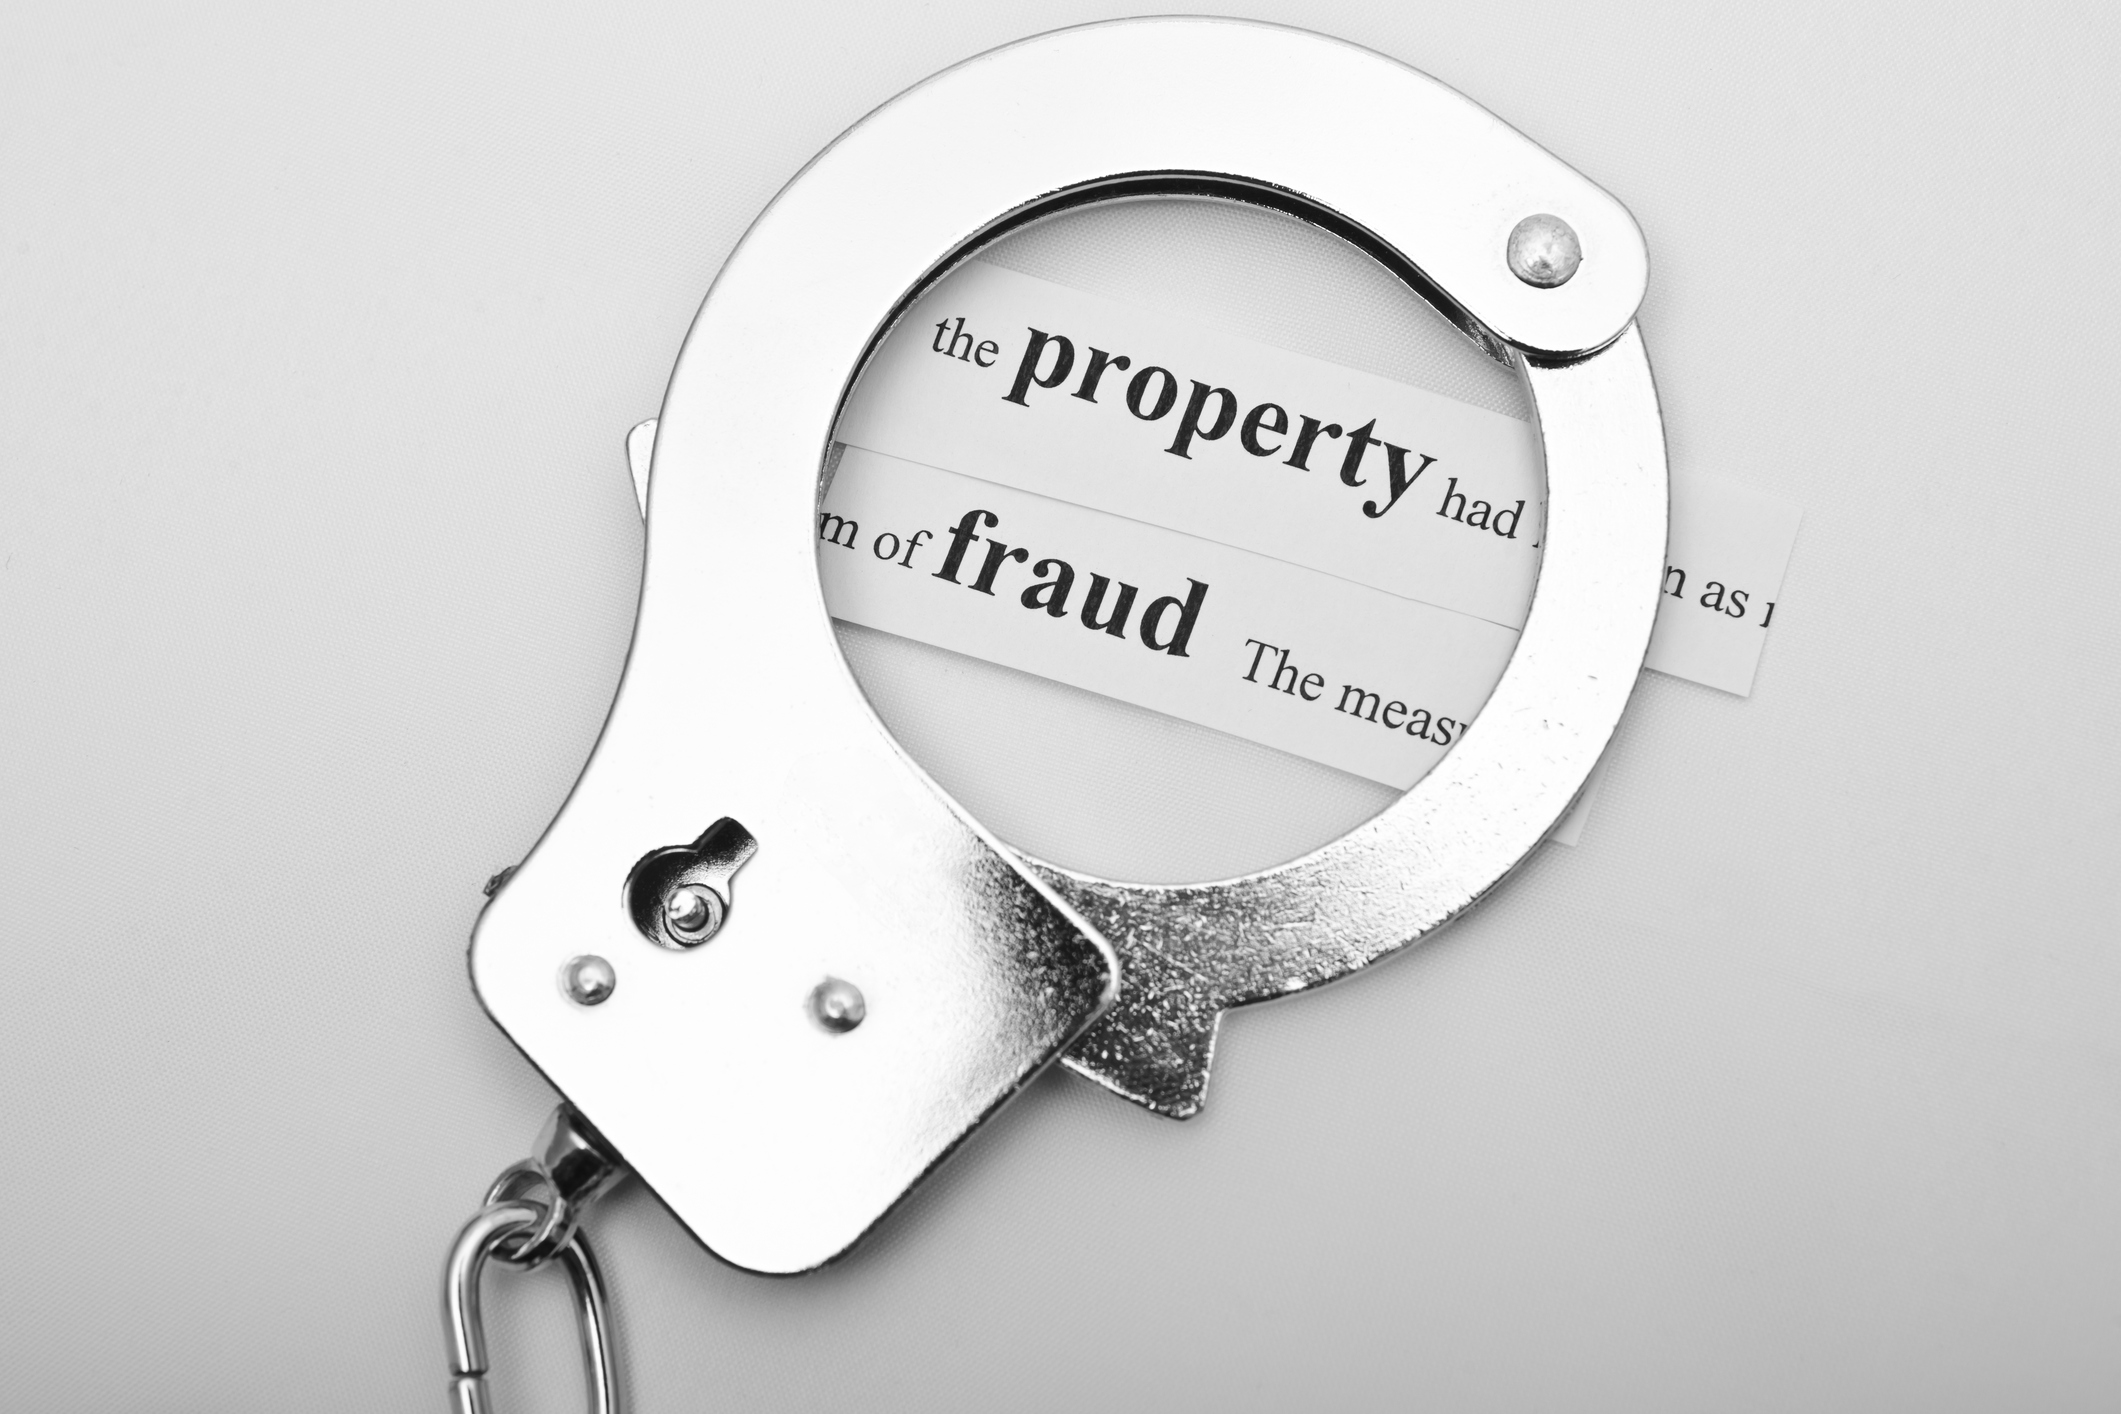 shiny handcuffs for Capital Gains Tax evader